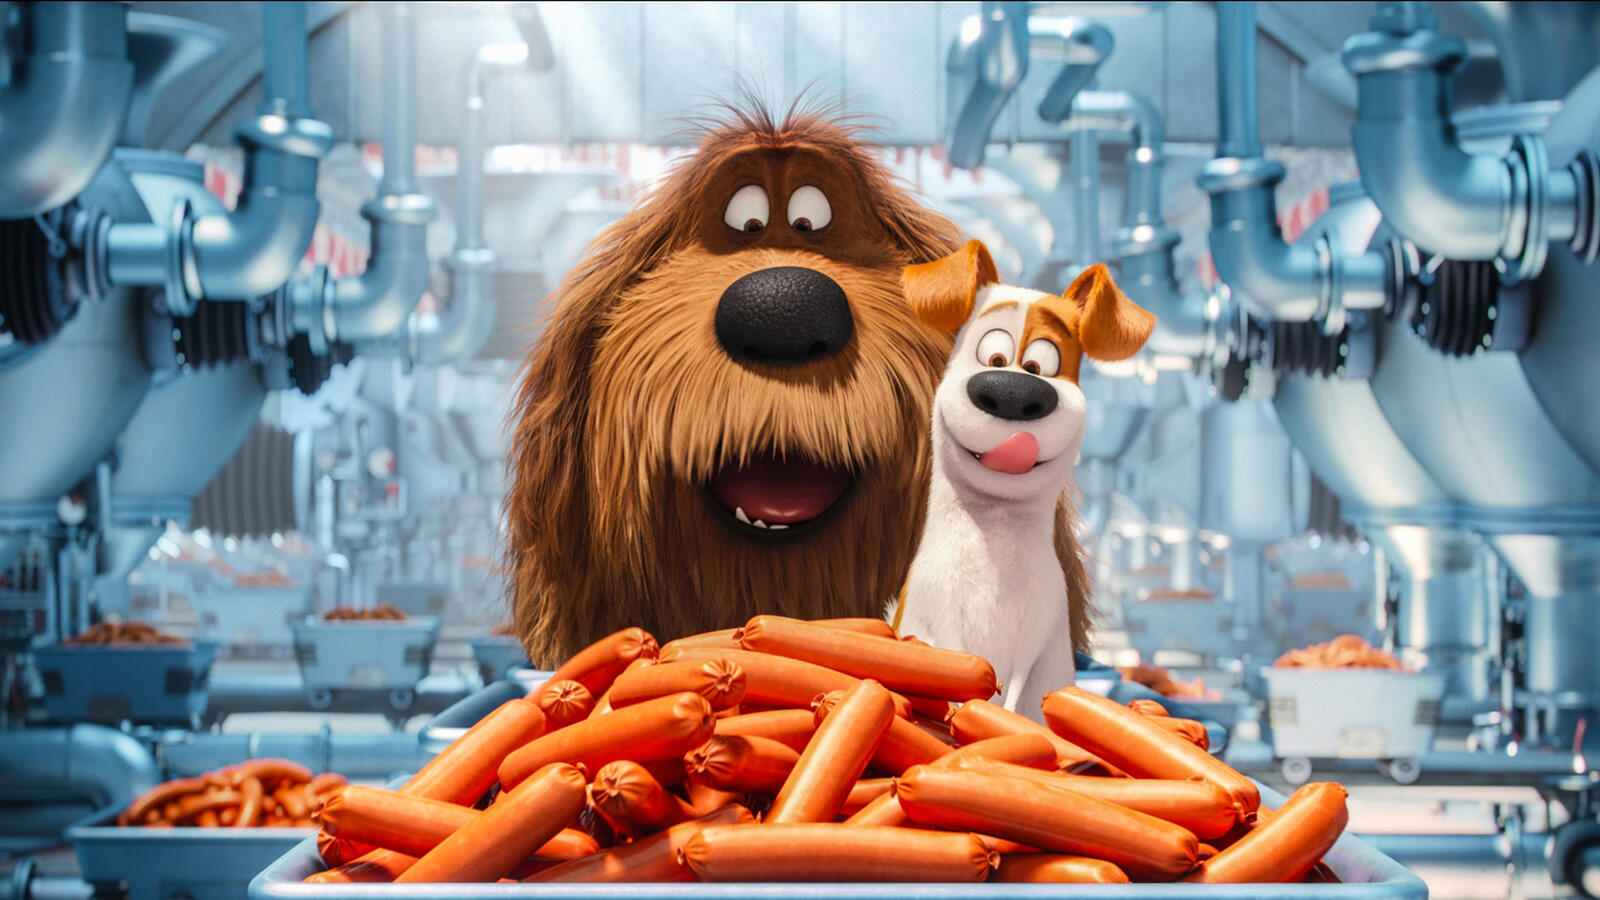 Wallpapers movies cartoons The Secret Life Of Pets on the desktop